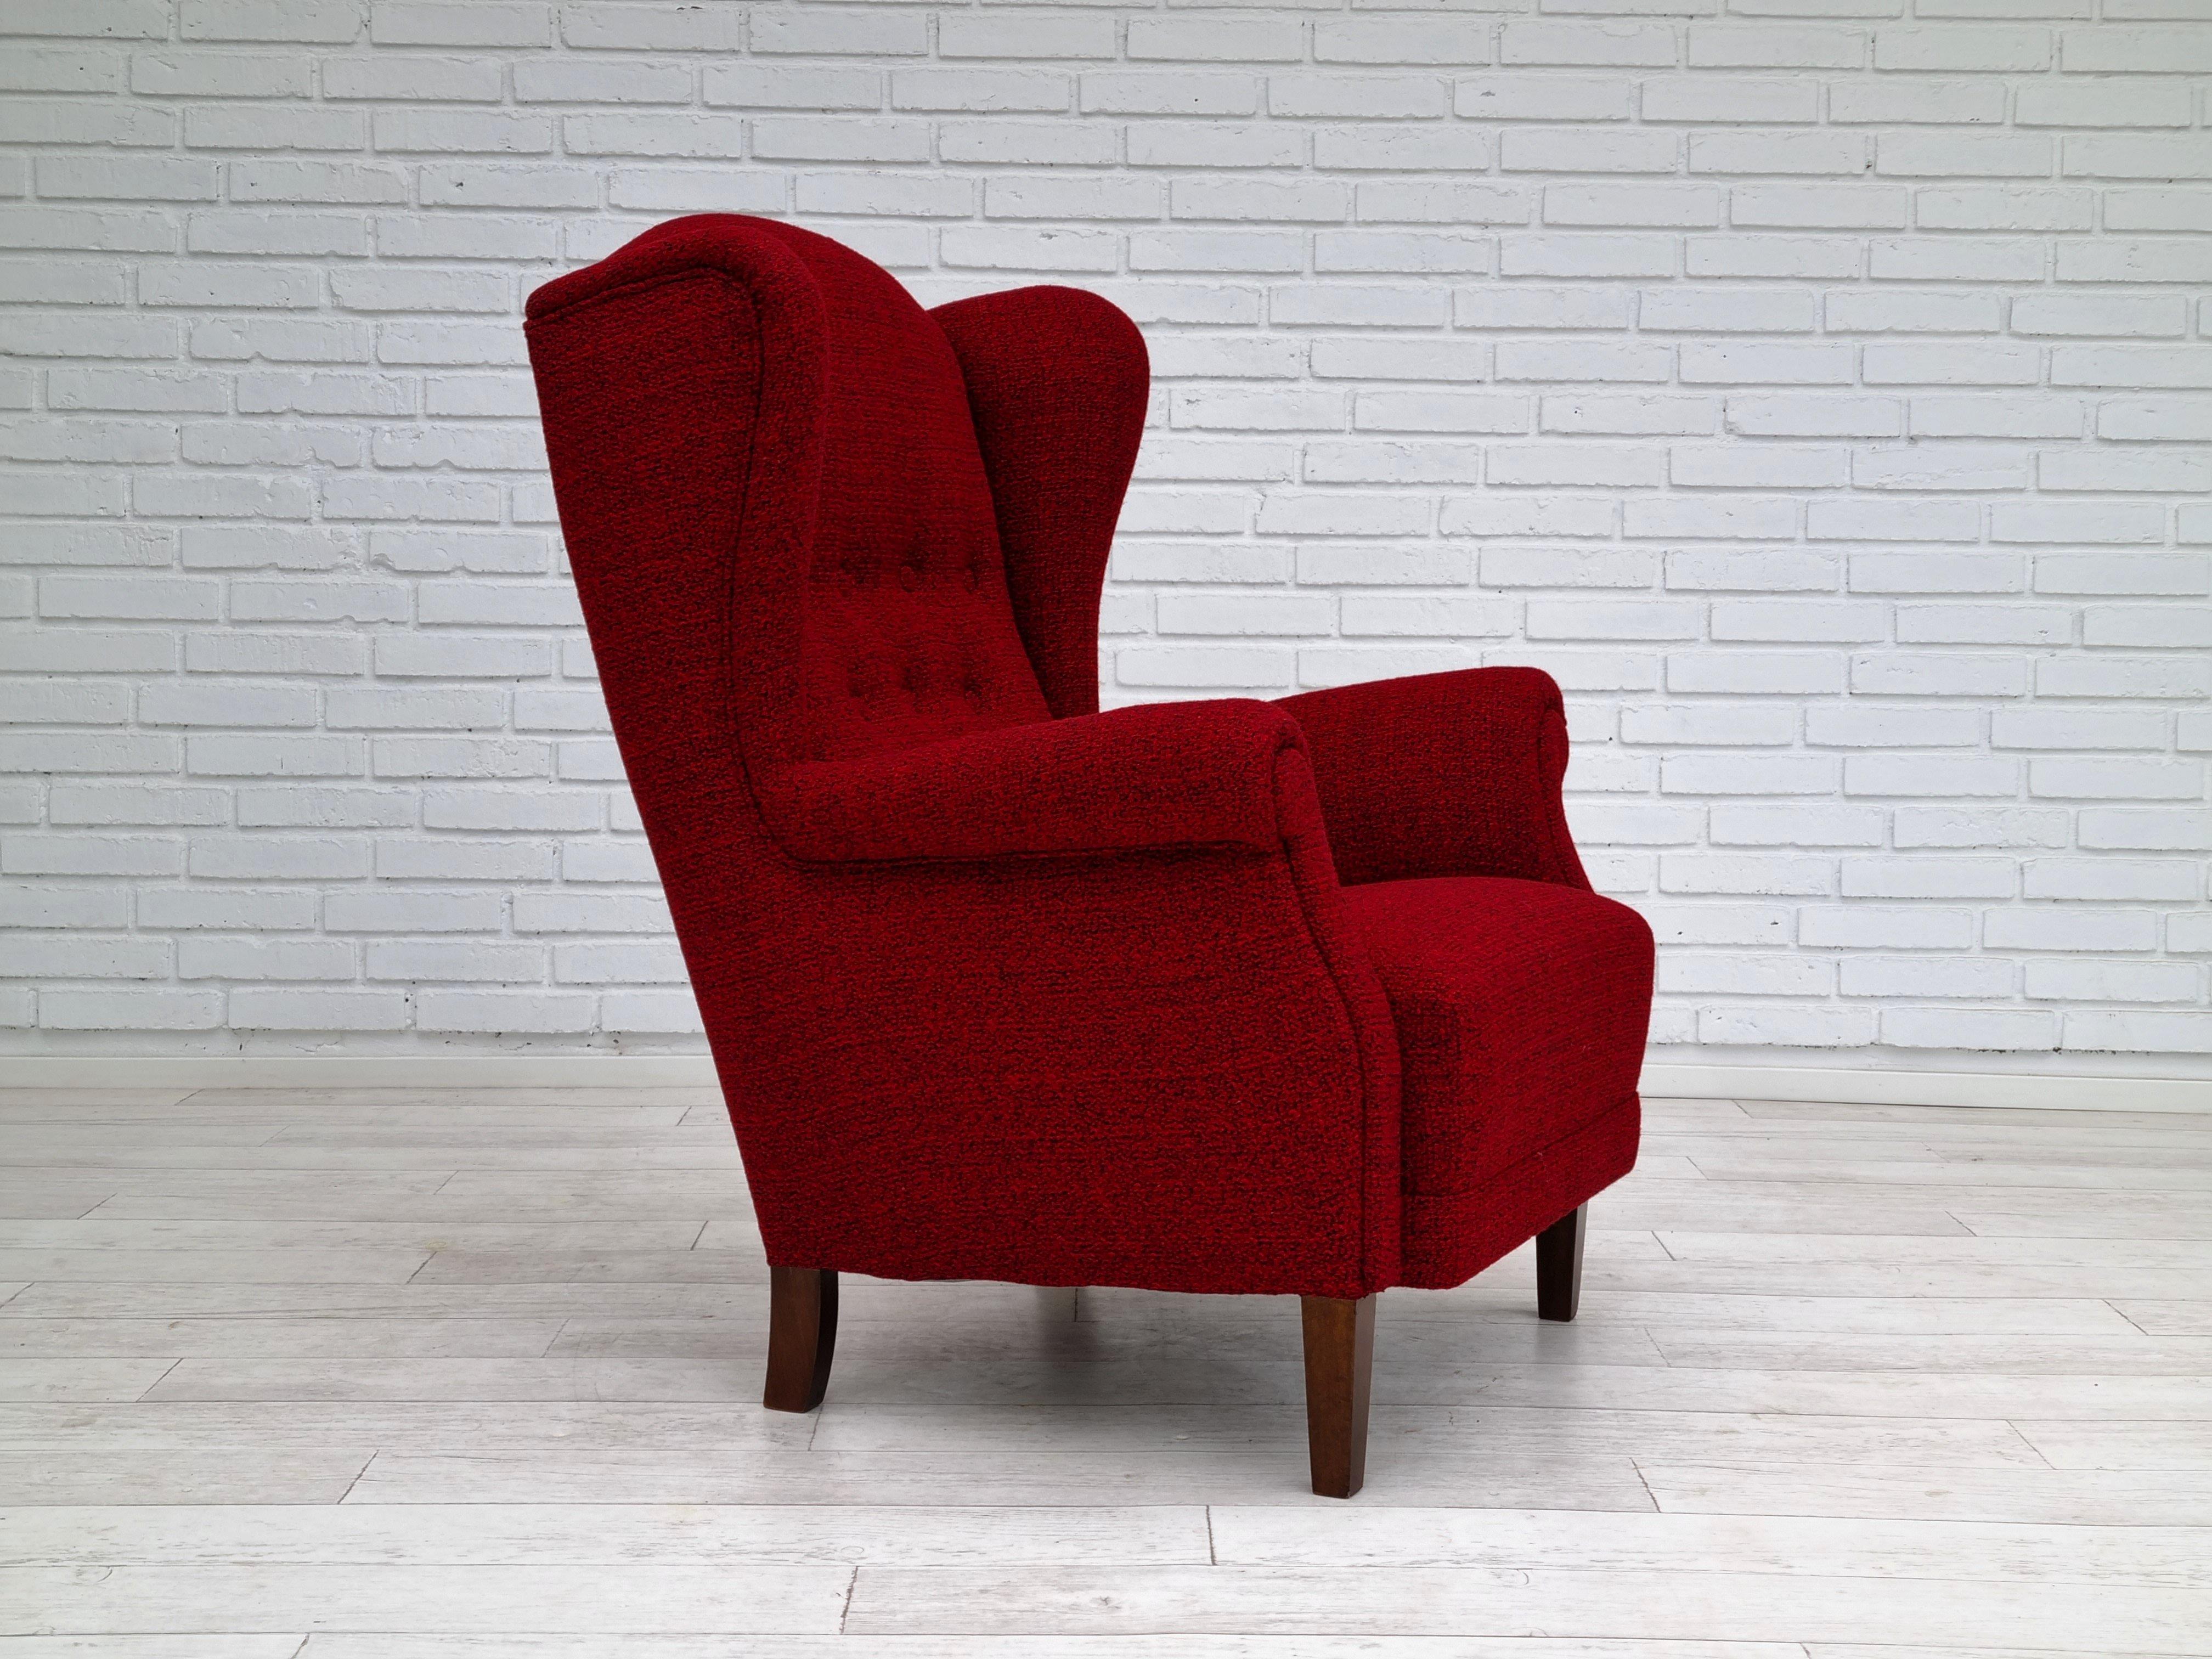 50s, Danish Design, Completely Refurbished Chair, Furniture Wool In Excellent Condition For Sale In Tarm, 82